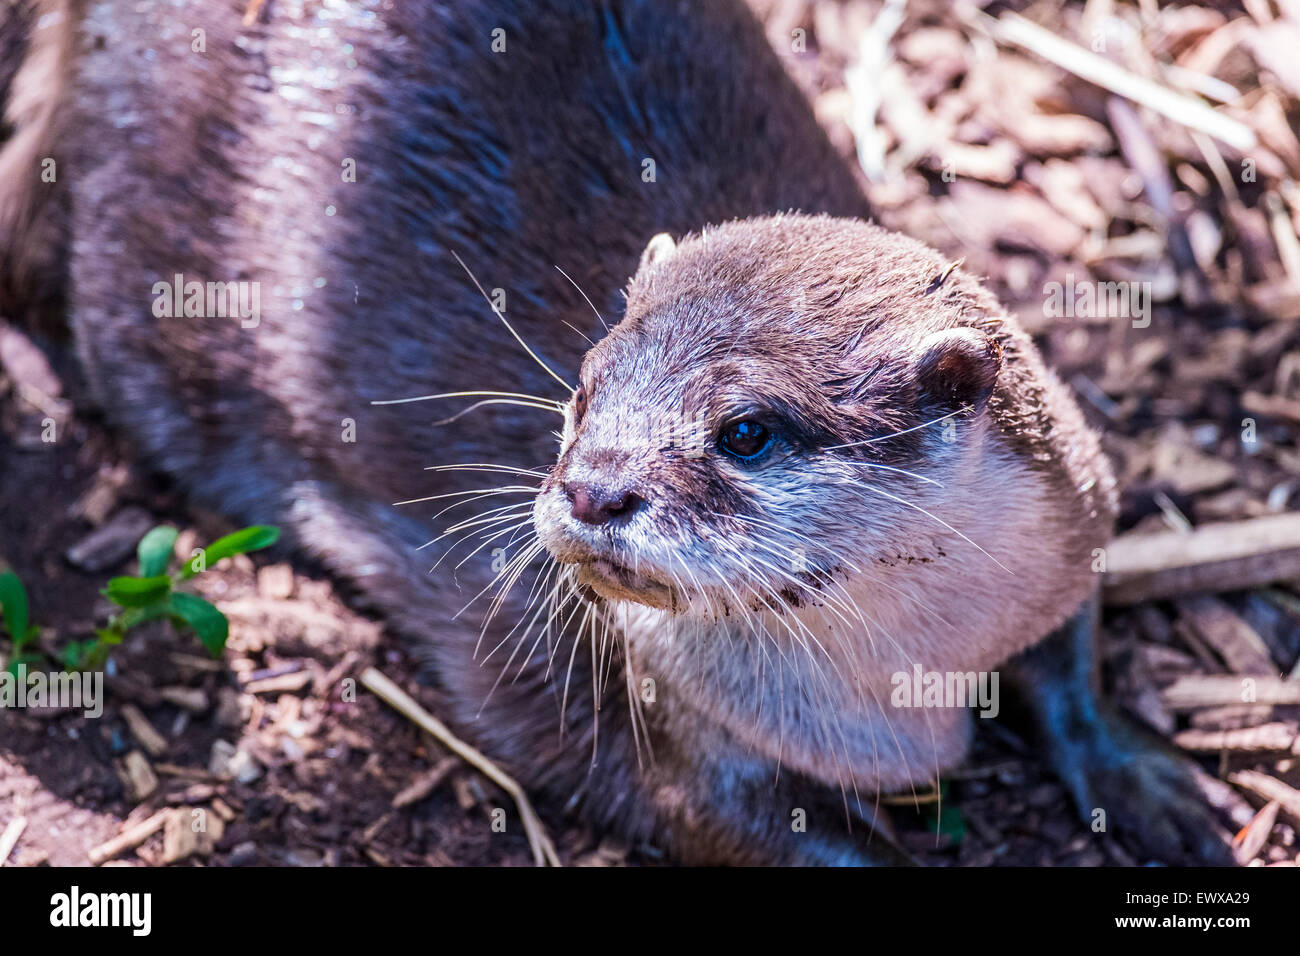 Otters are carnivorous mammals in the subfamily Lutrinae. The 13 extant otter species are all semiaquatic, aquatic or marine, with diets based on fish Stock Photo